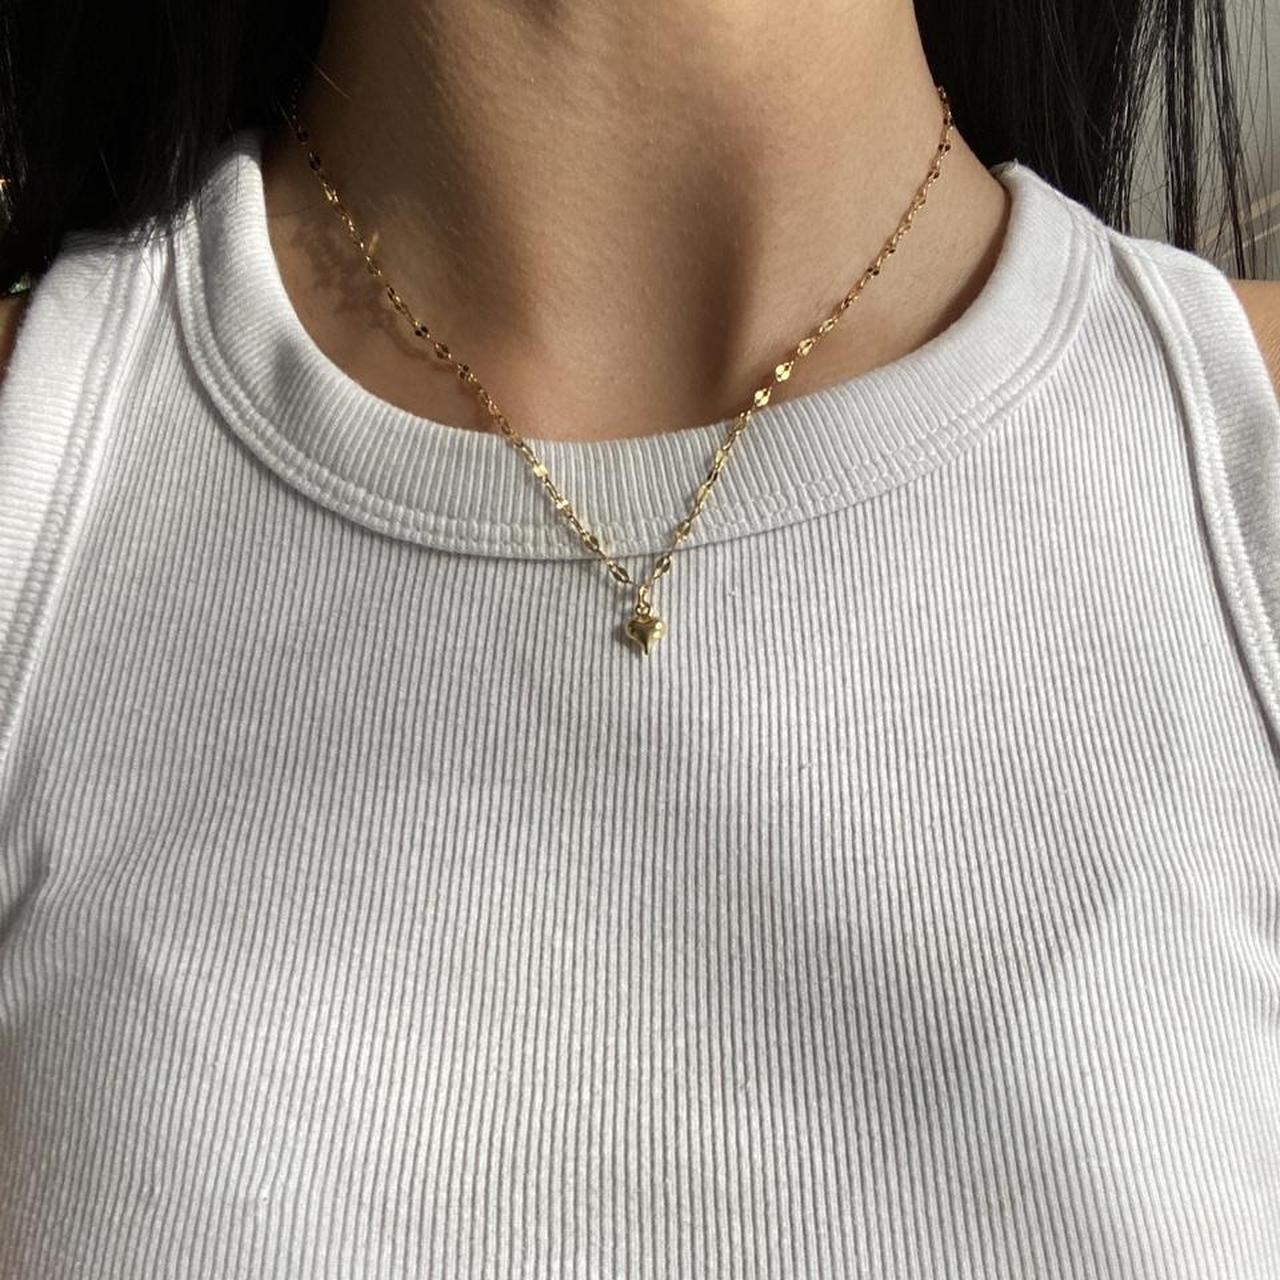 Amazon.com: Annika Bella Sterling Silver Chain Choker Necklace, Length 13-16  Inches, Minimalist Layering Chokers, Waterproof, 925 Adjustable Short  Necklaces for Women and Teens (Rope chain) : Handmade Products